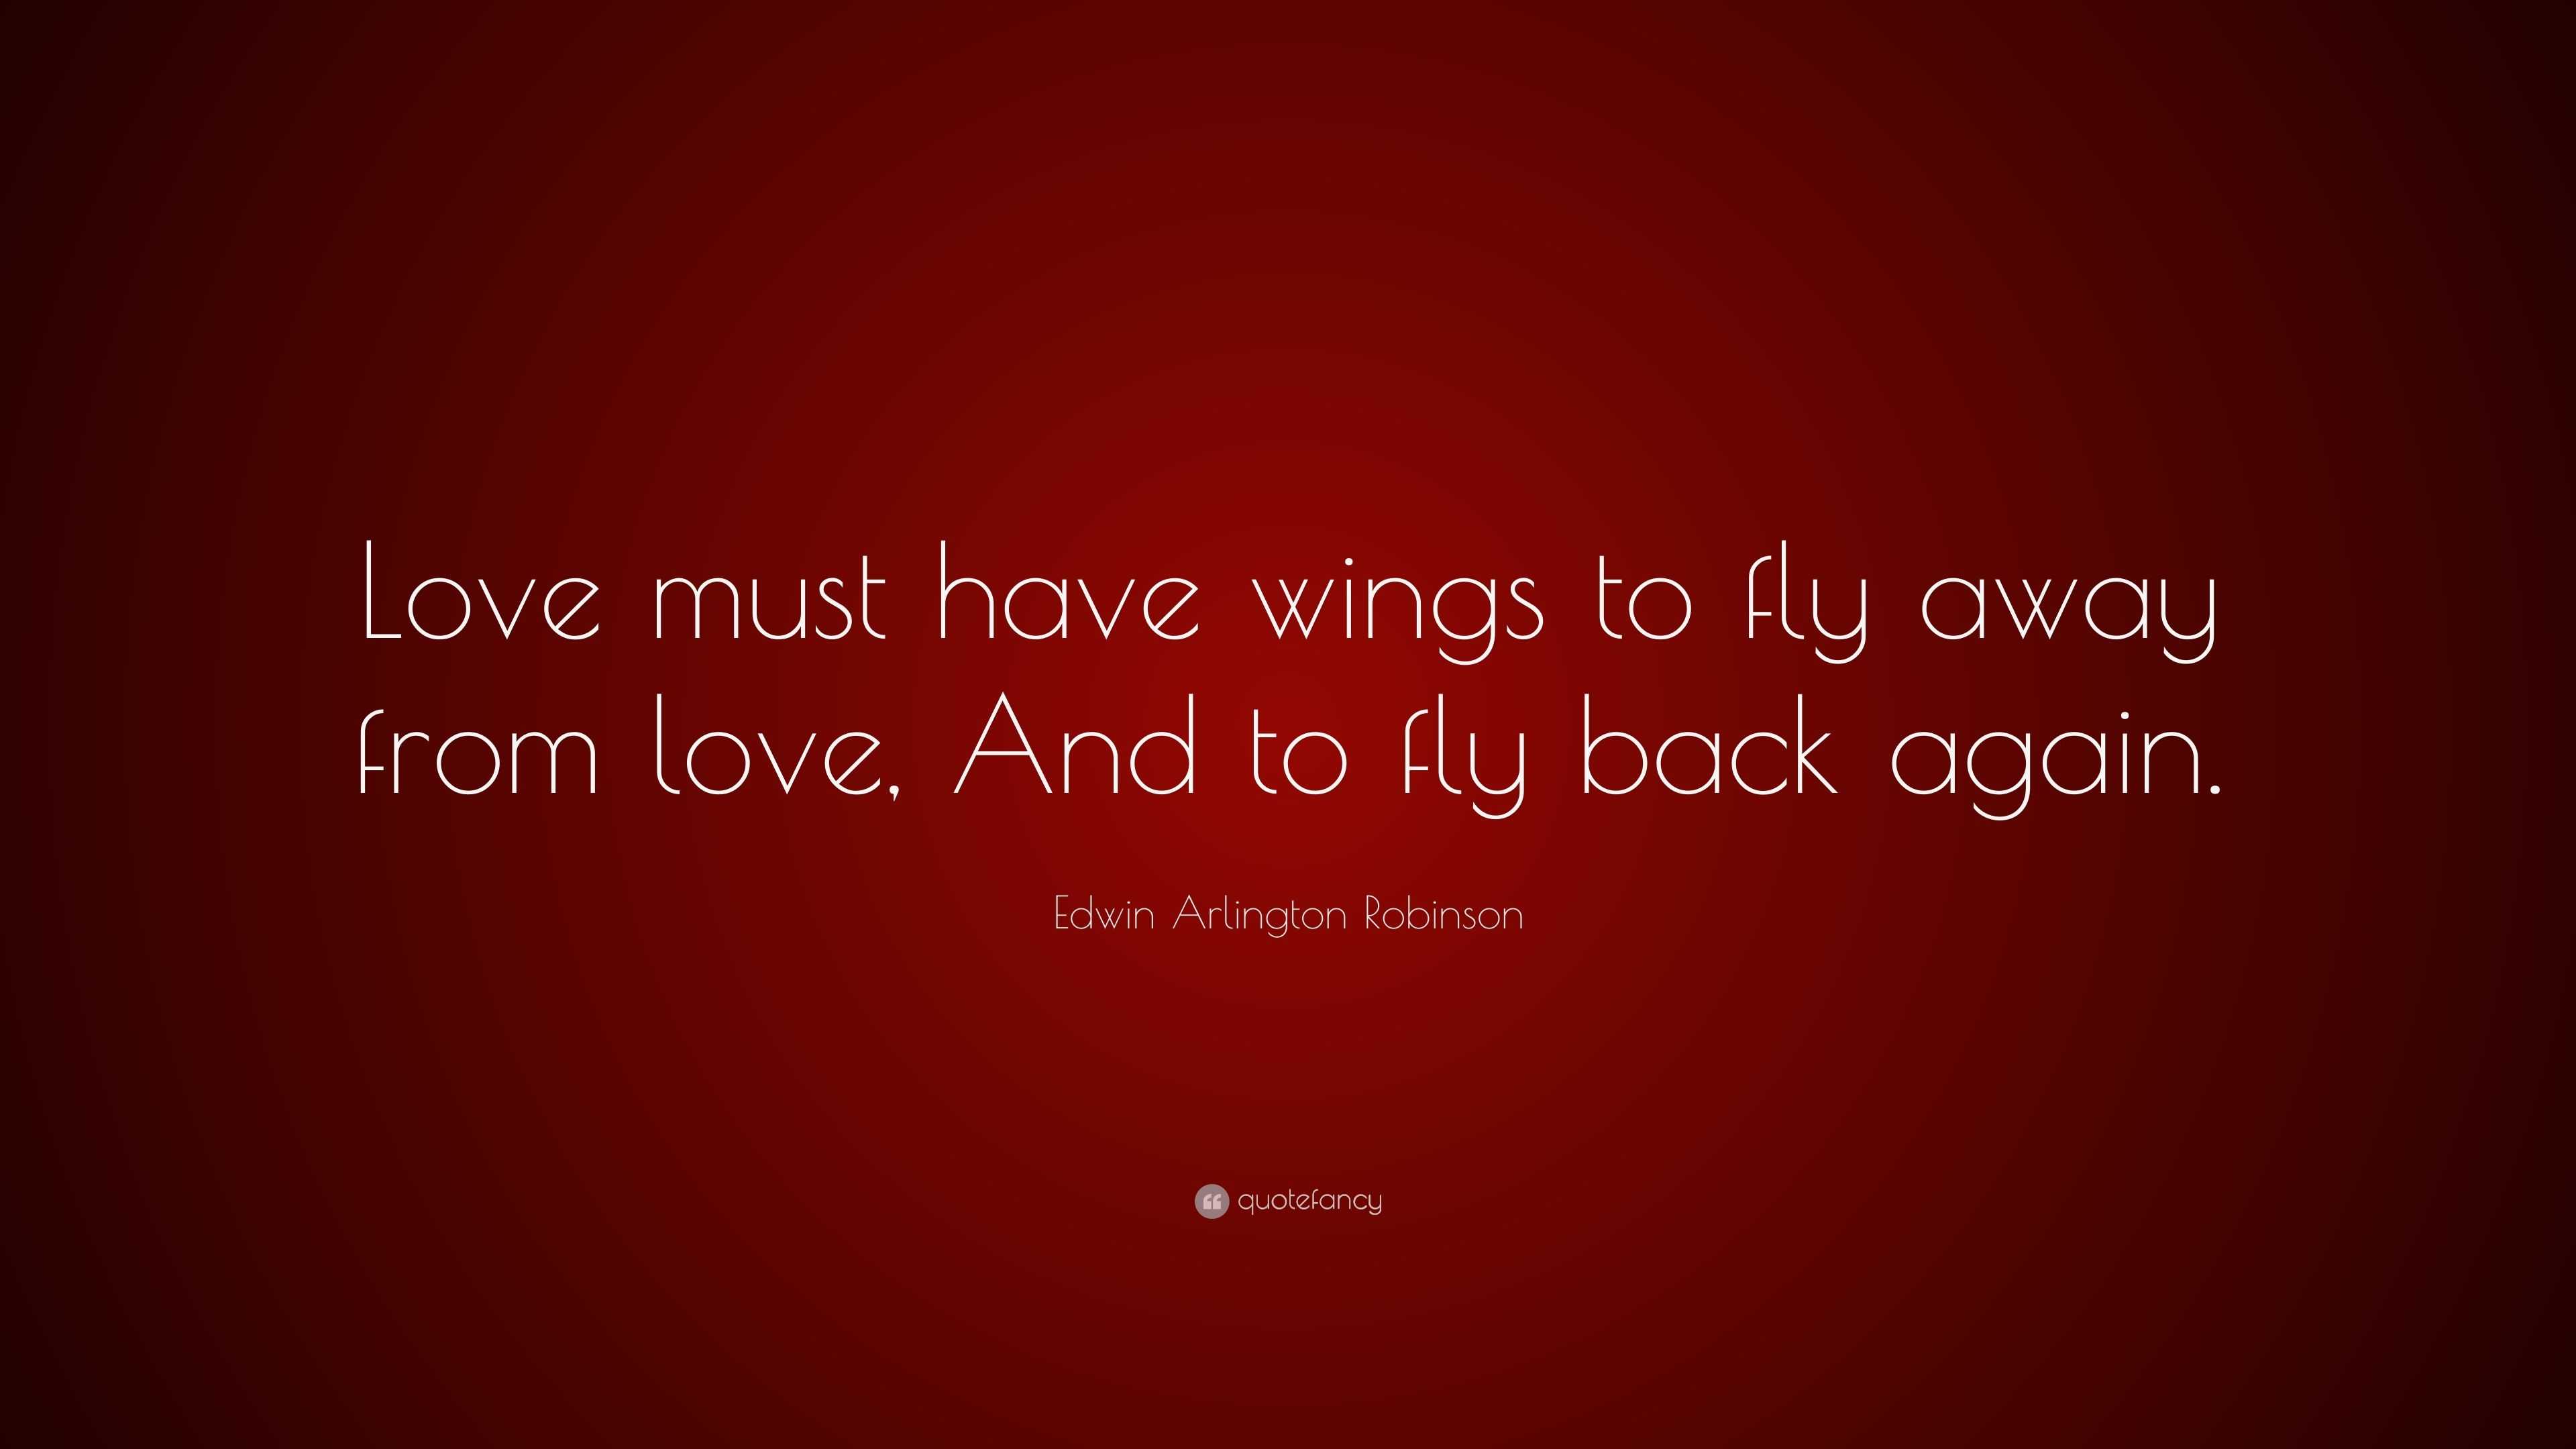 Edwin Arlington Robinson Quote: “Love must have wings to fly away from ...